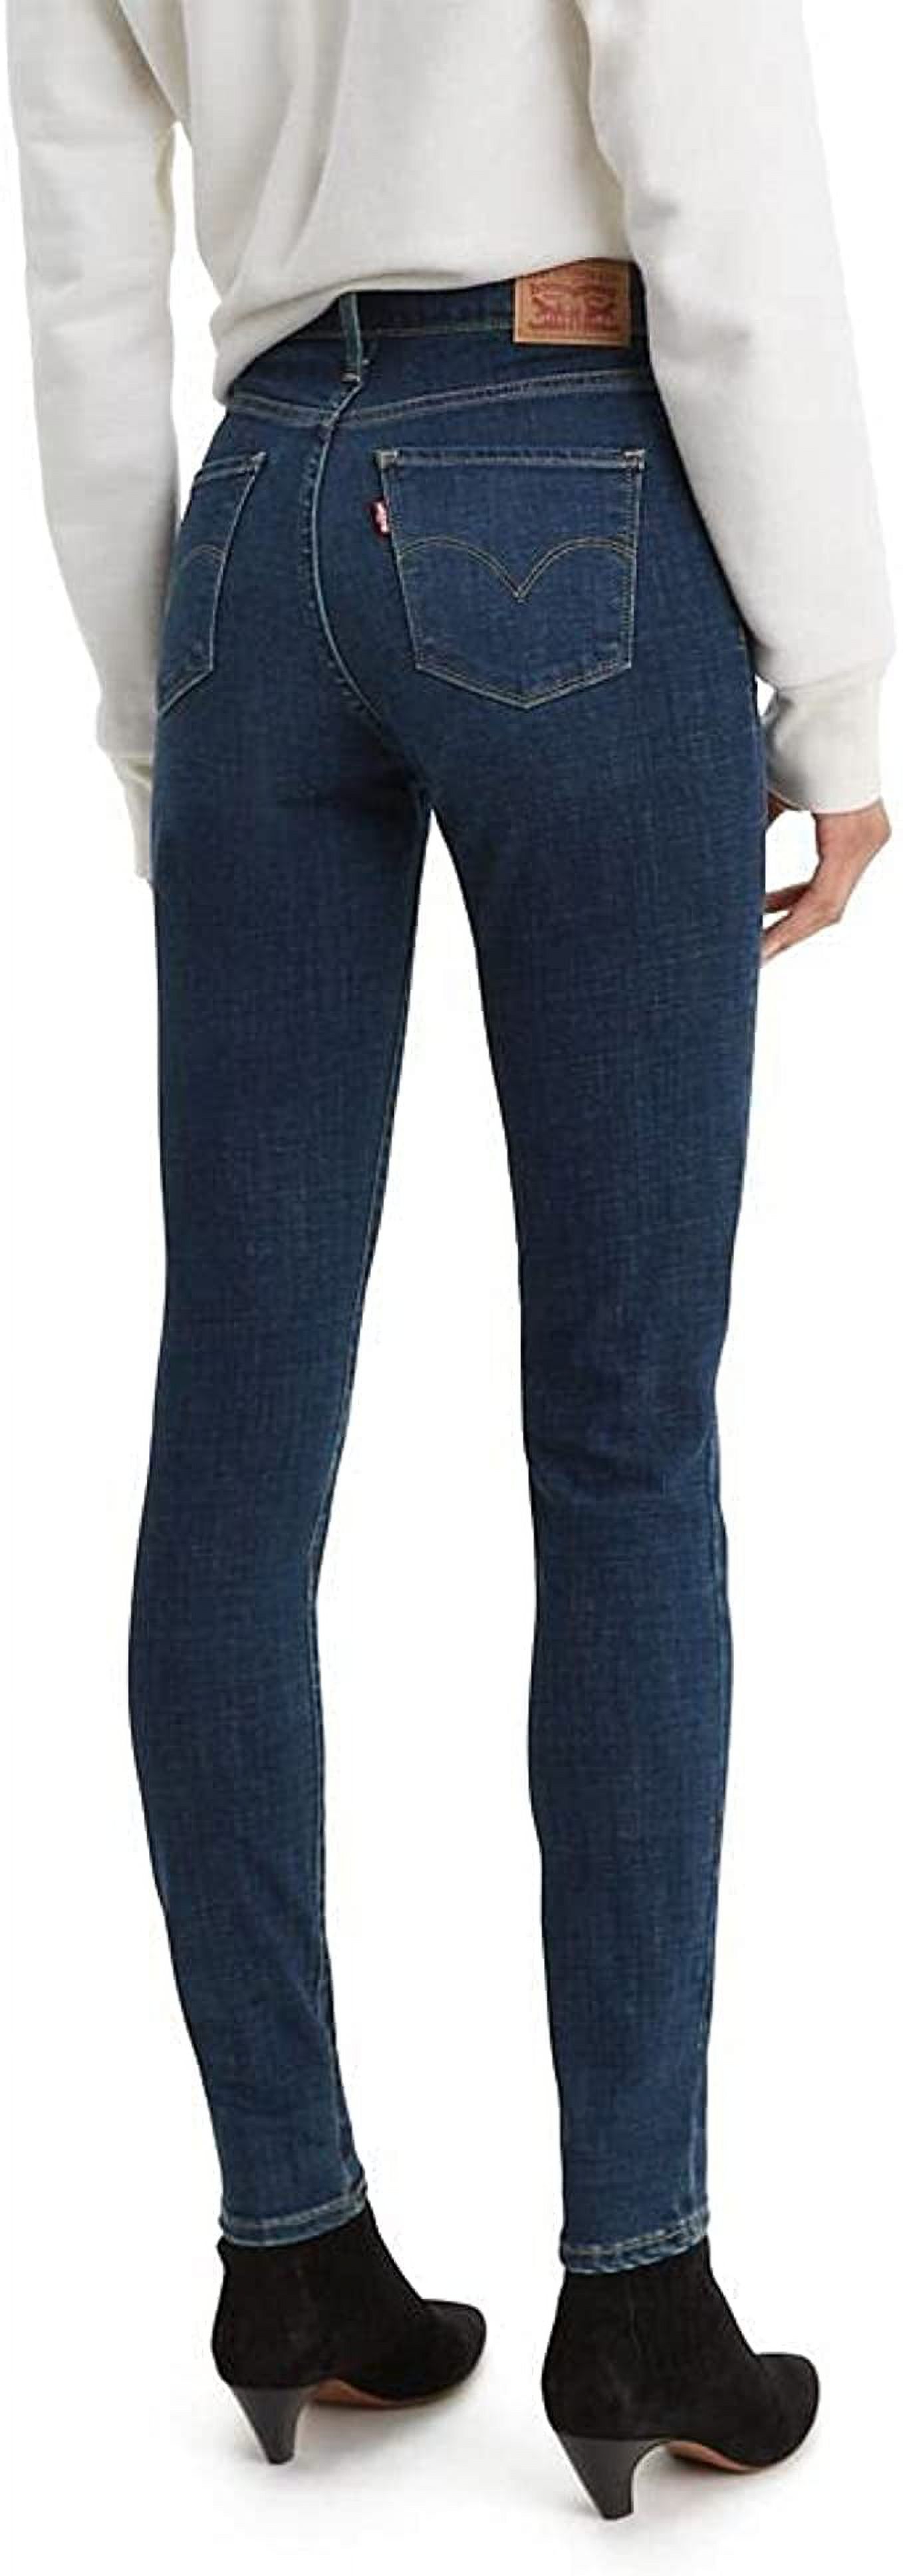 Levi’s Original Red Tab Women's 311 Shaping Skinny Jeans - image 2 of 4